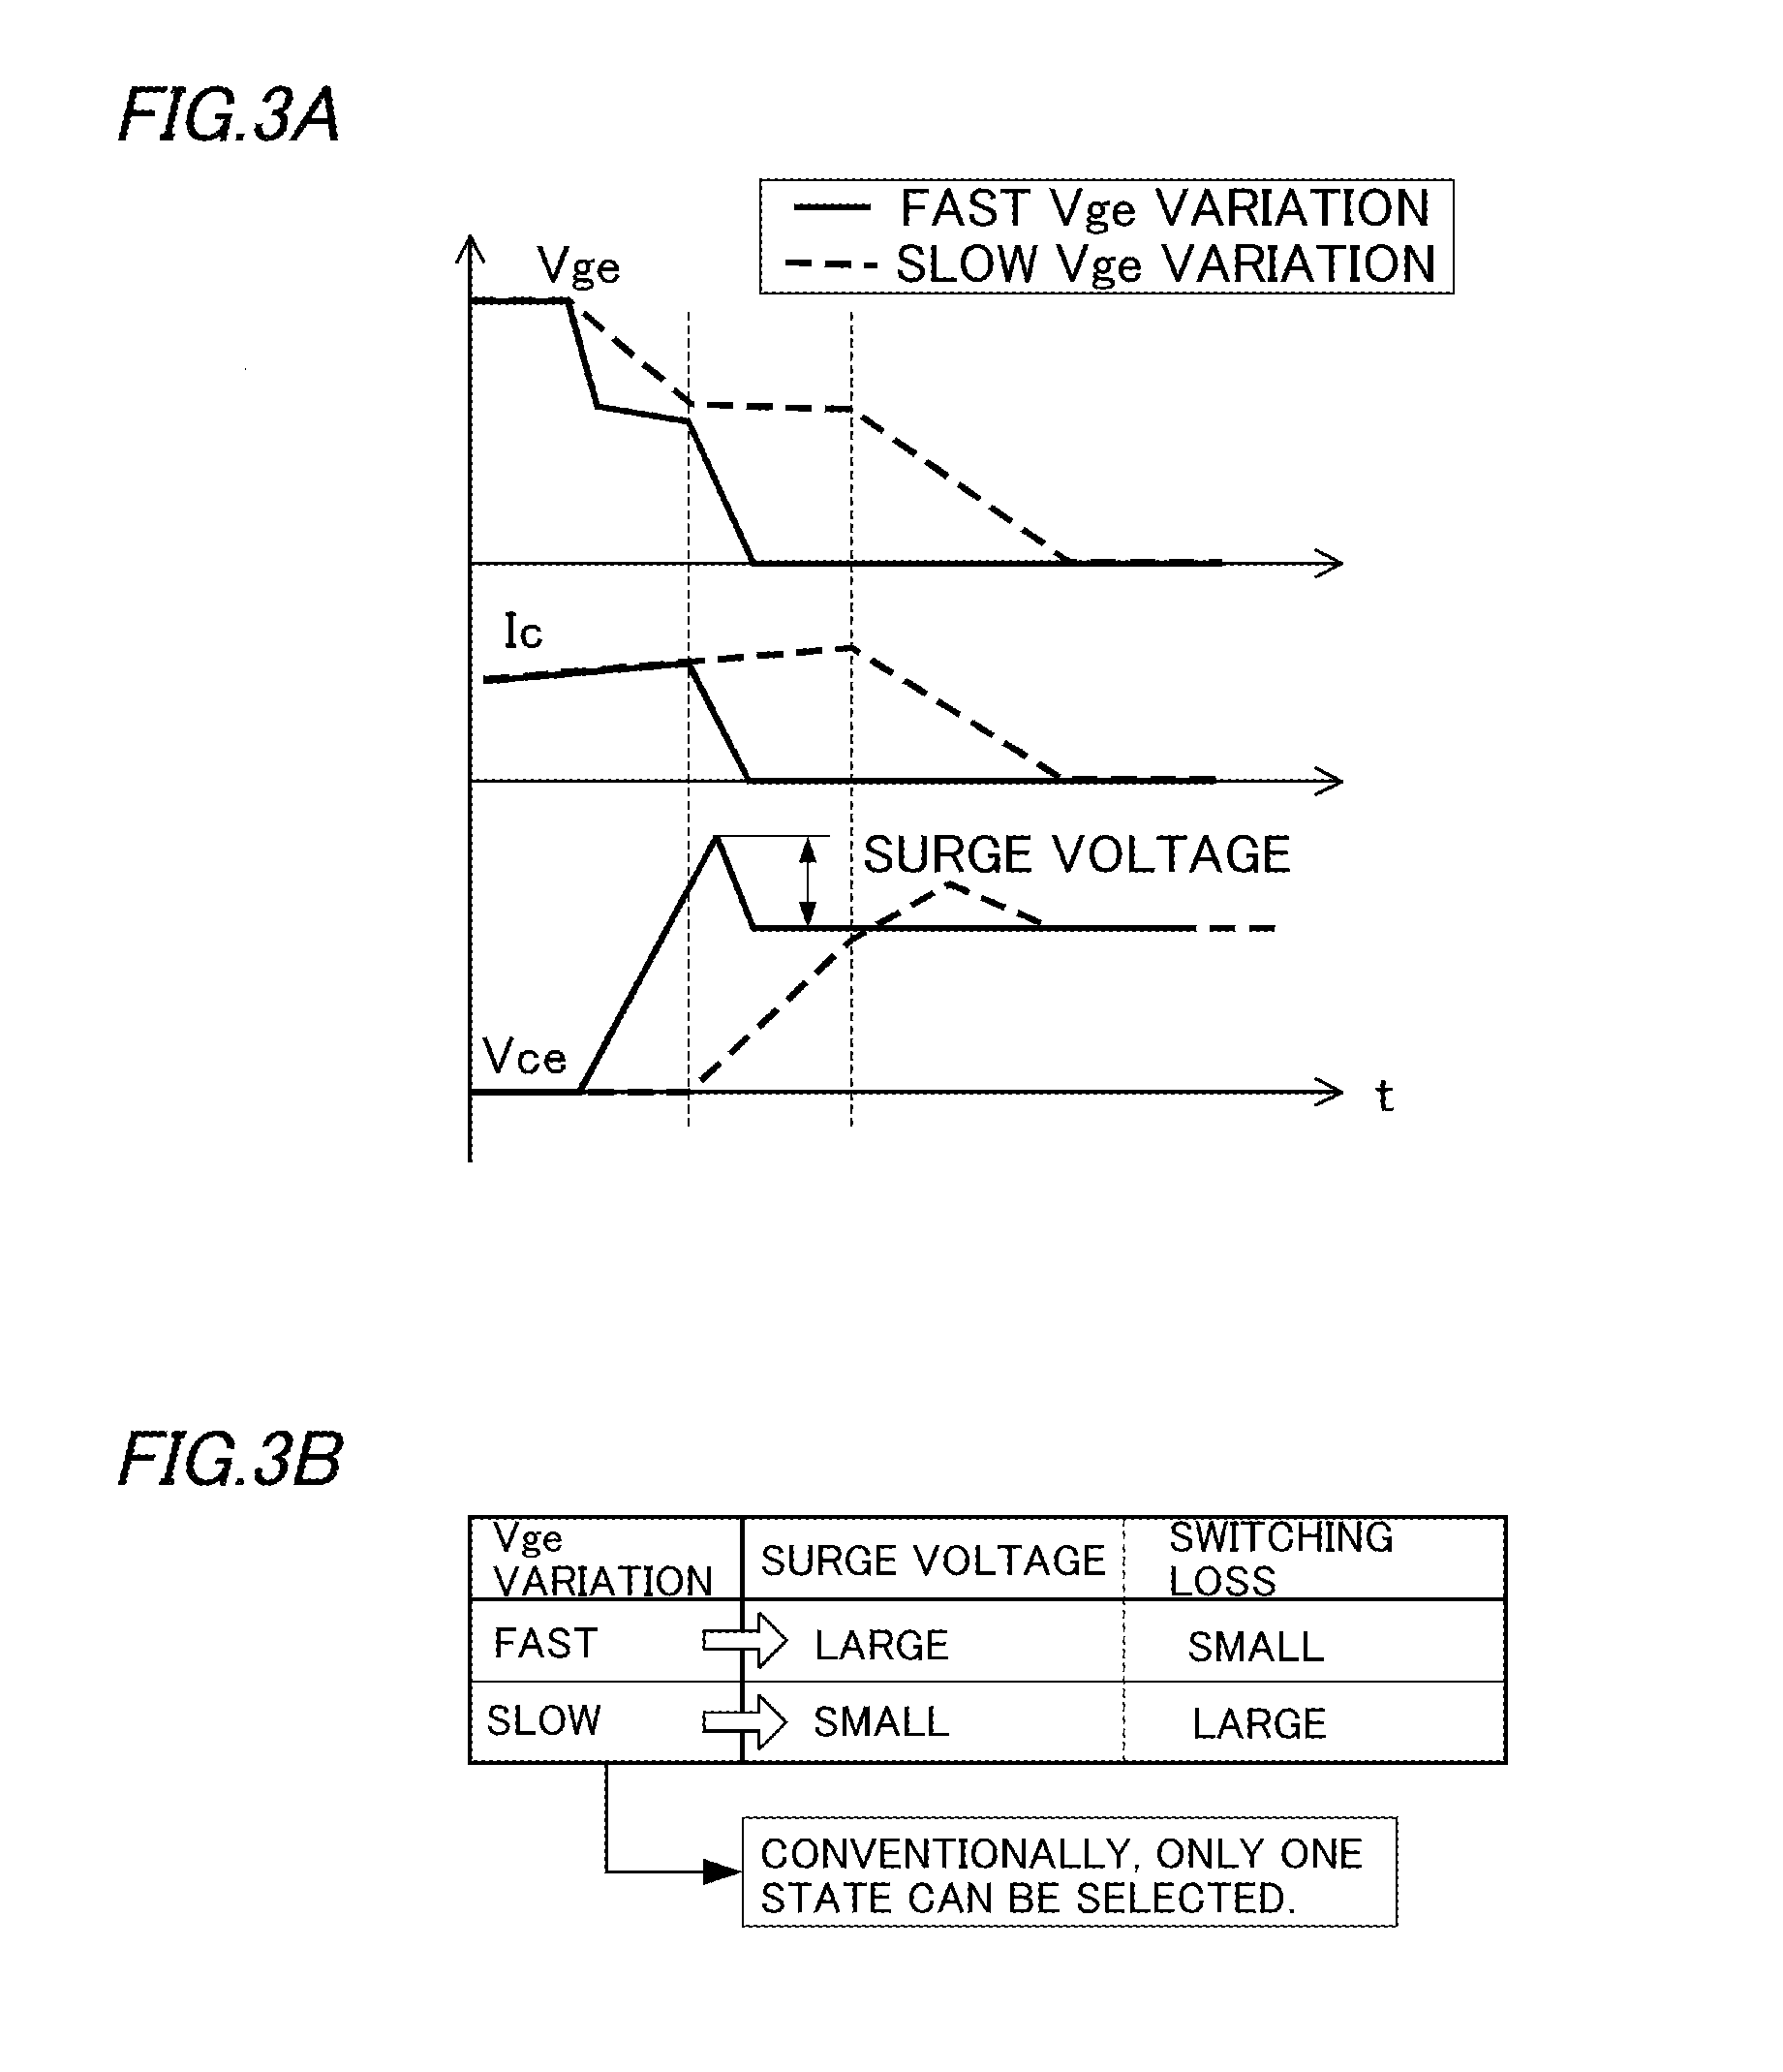 Semiconductor device driving unit and method